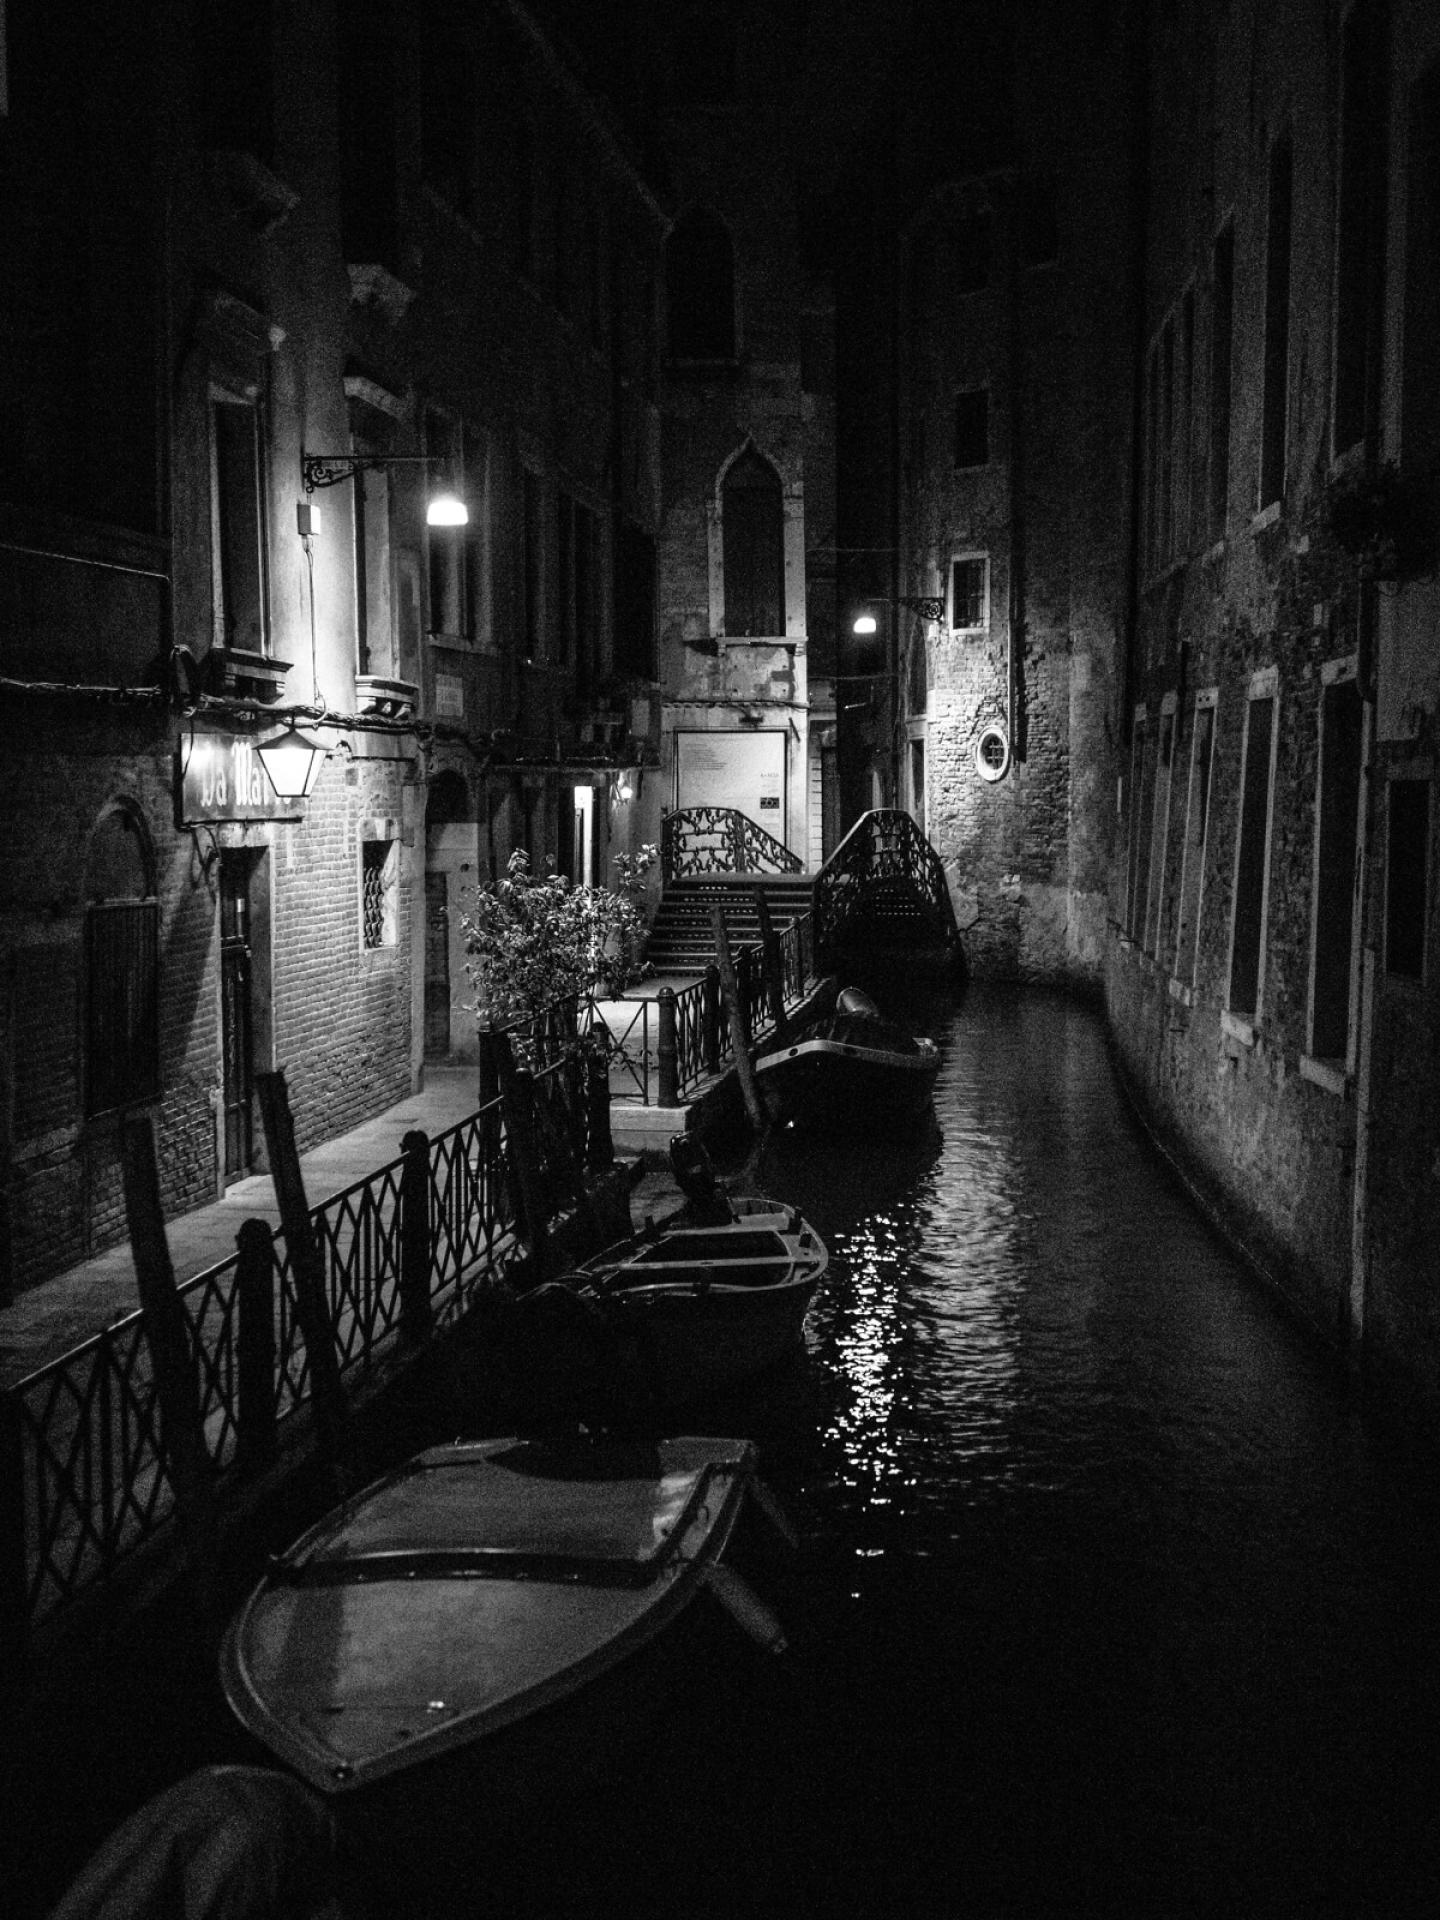 New York Photography Awards Winner - Venice when it's late.